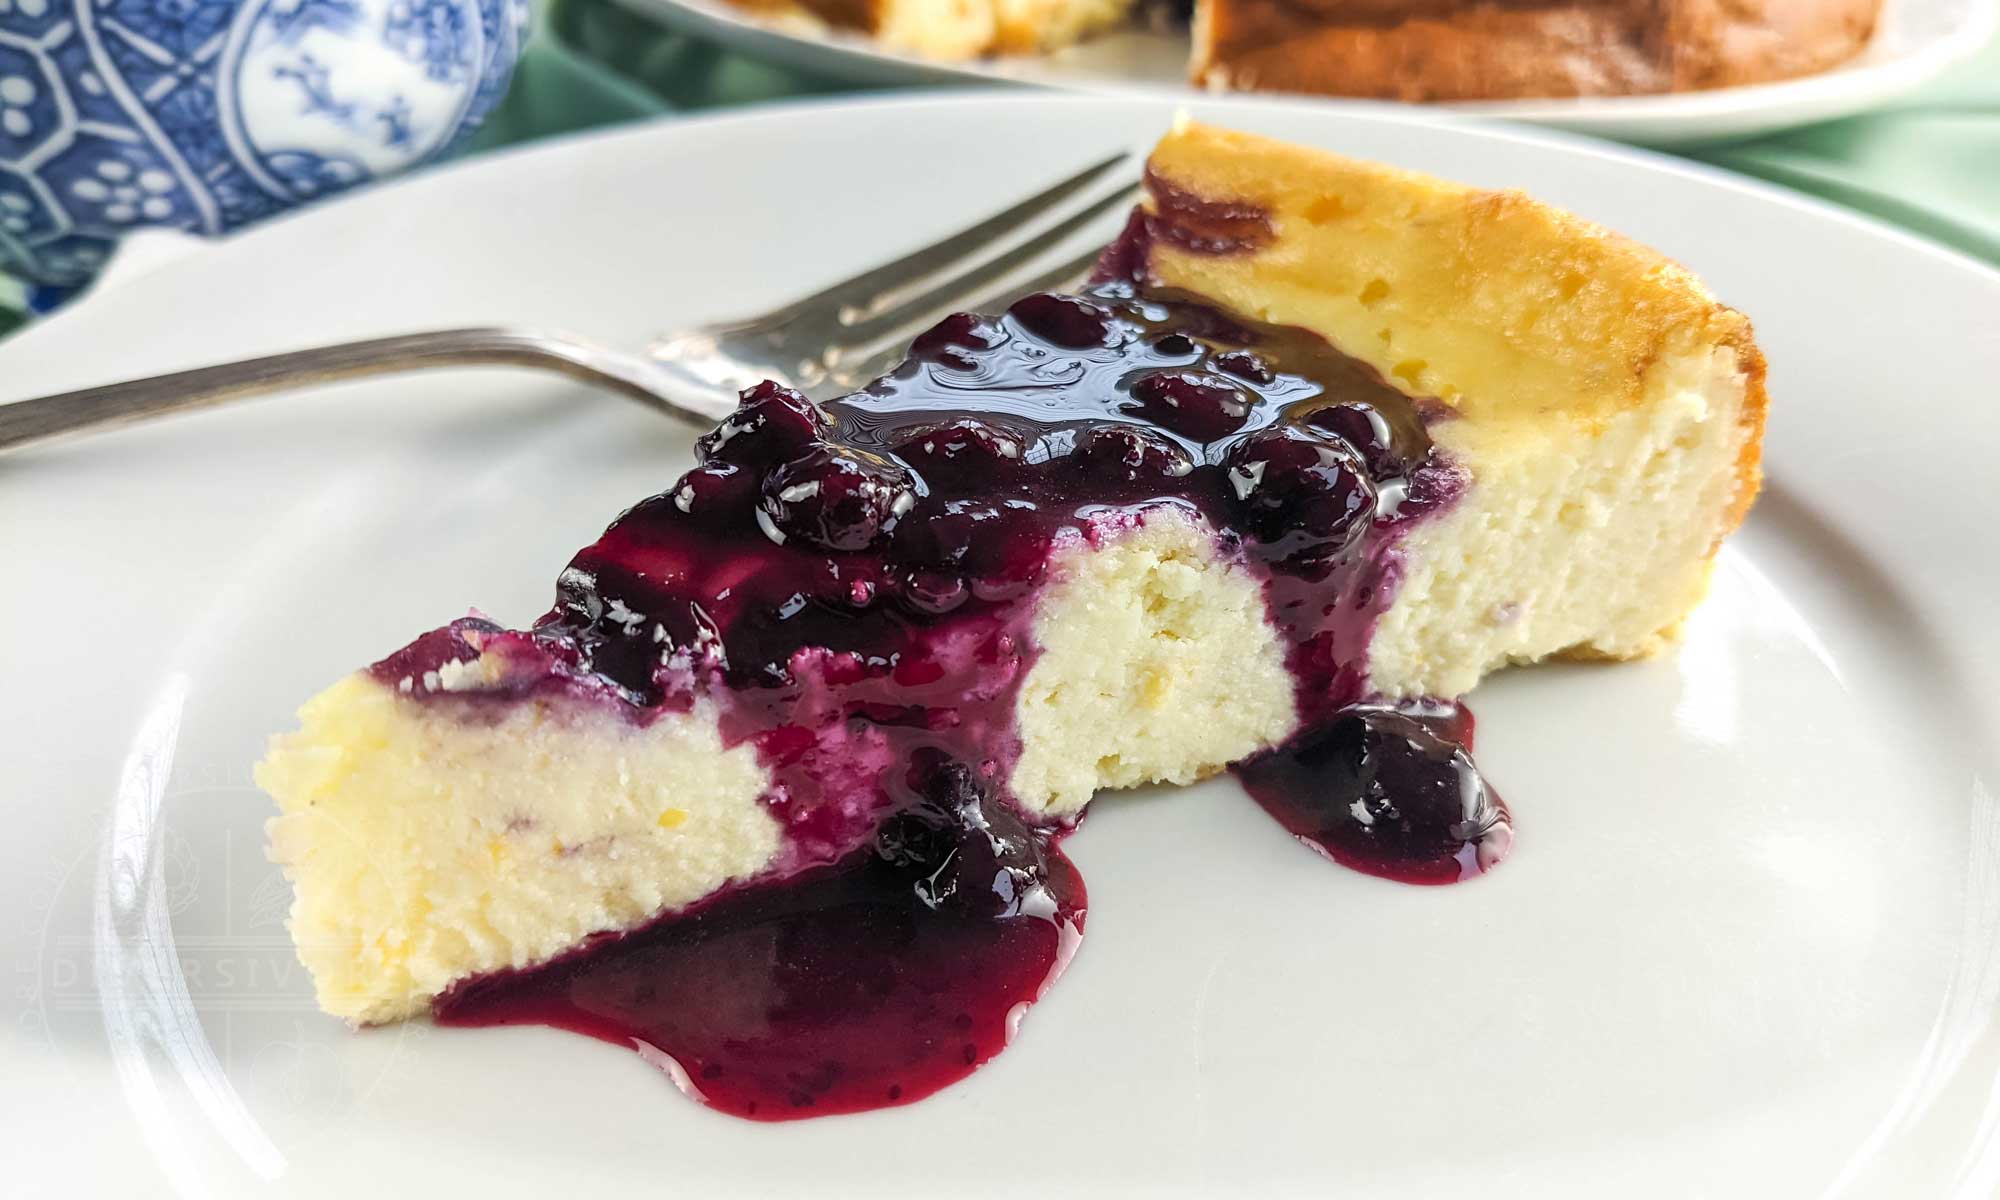 Featured image for “Ricotta Cheesecake with Blueberry and Lemon”